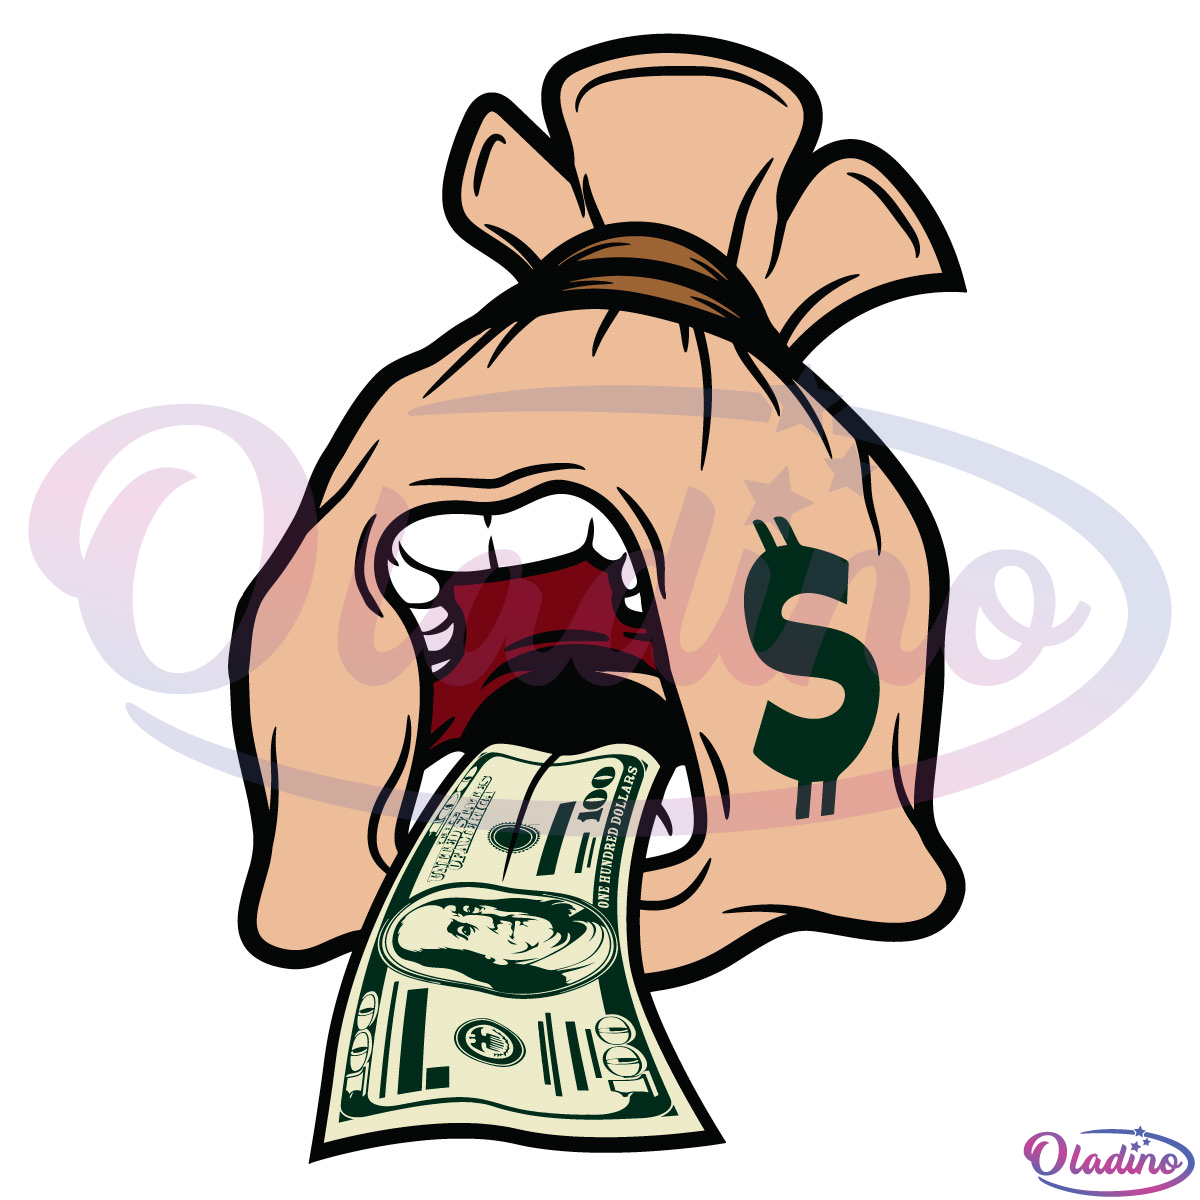 bag with money